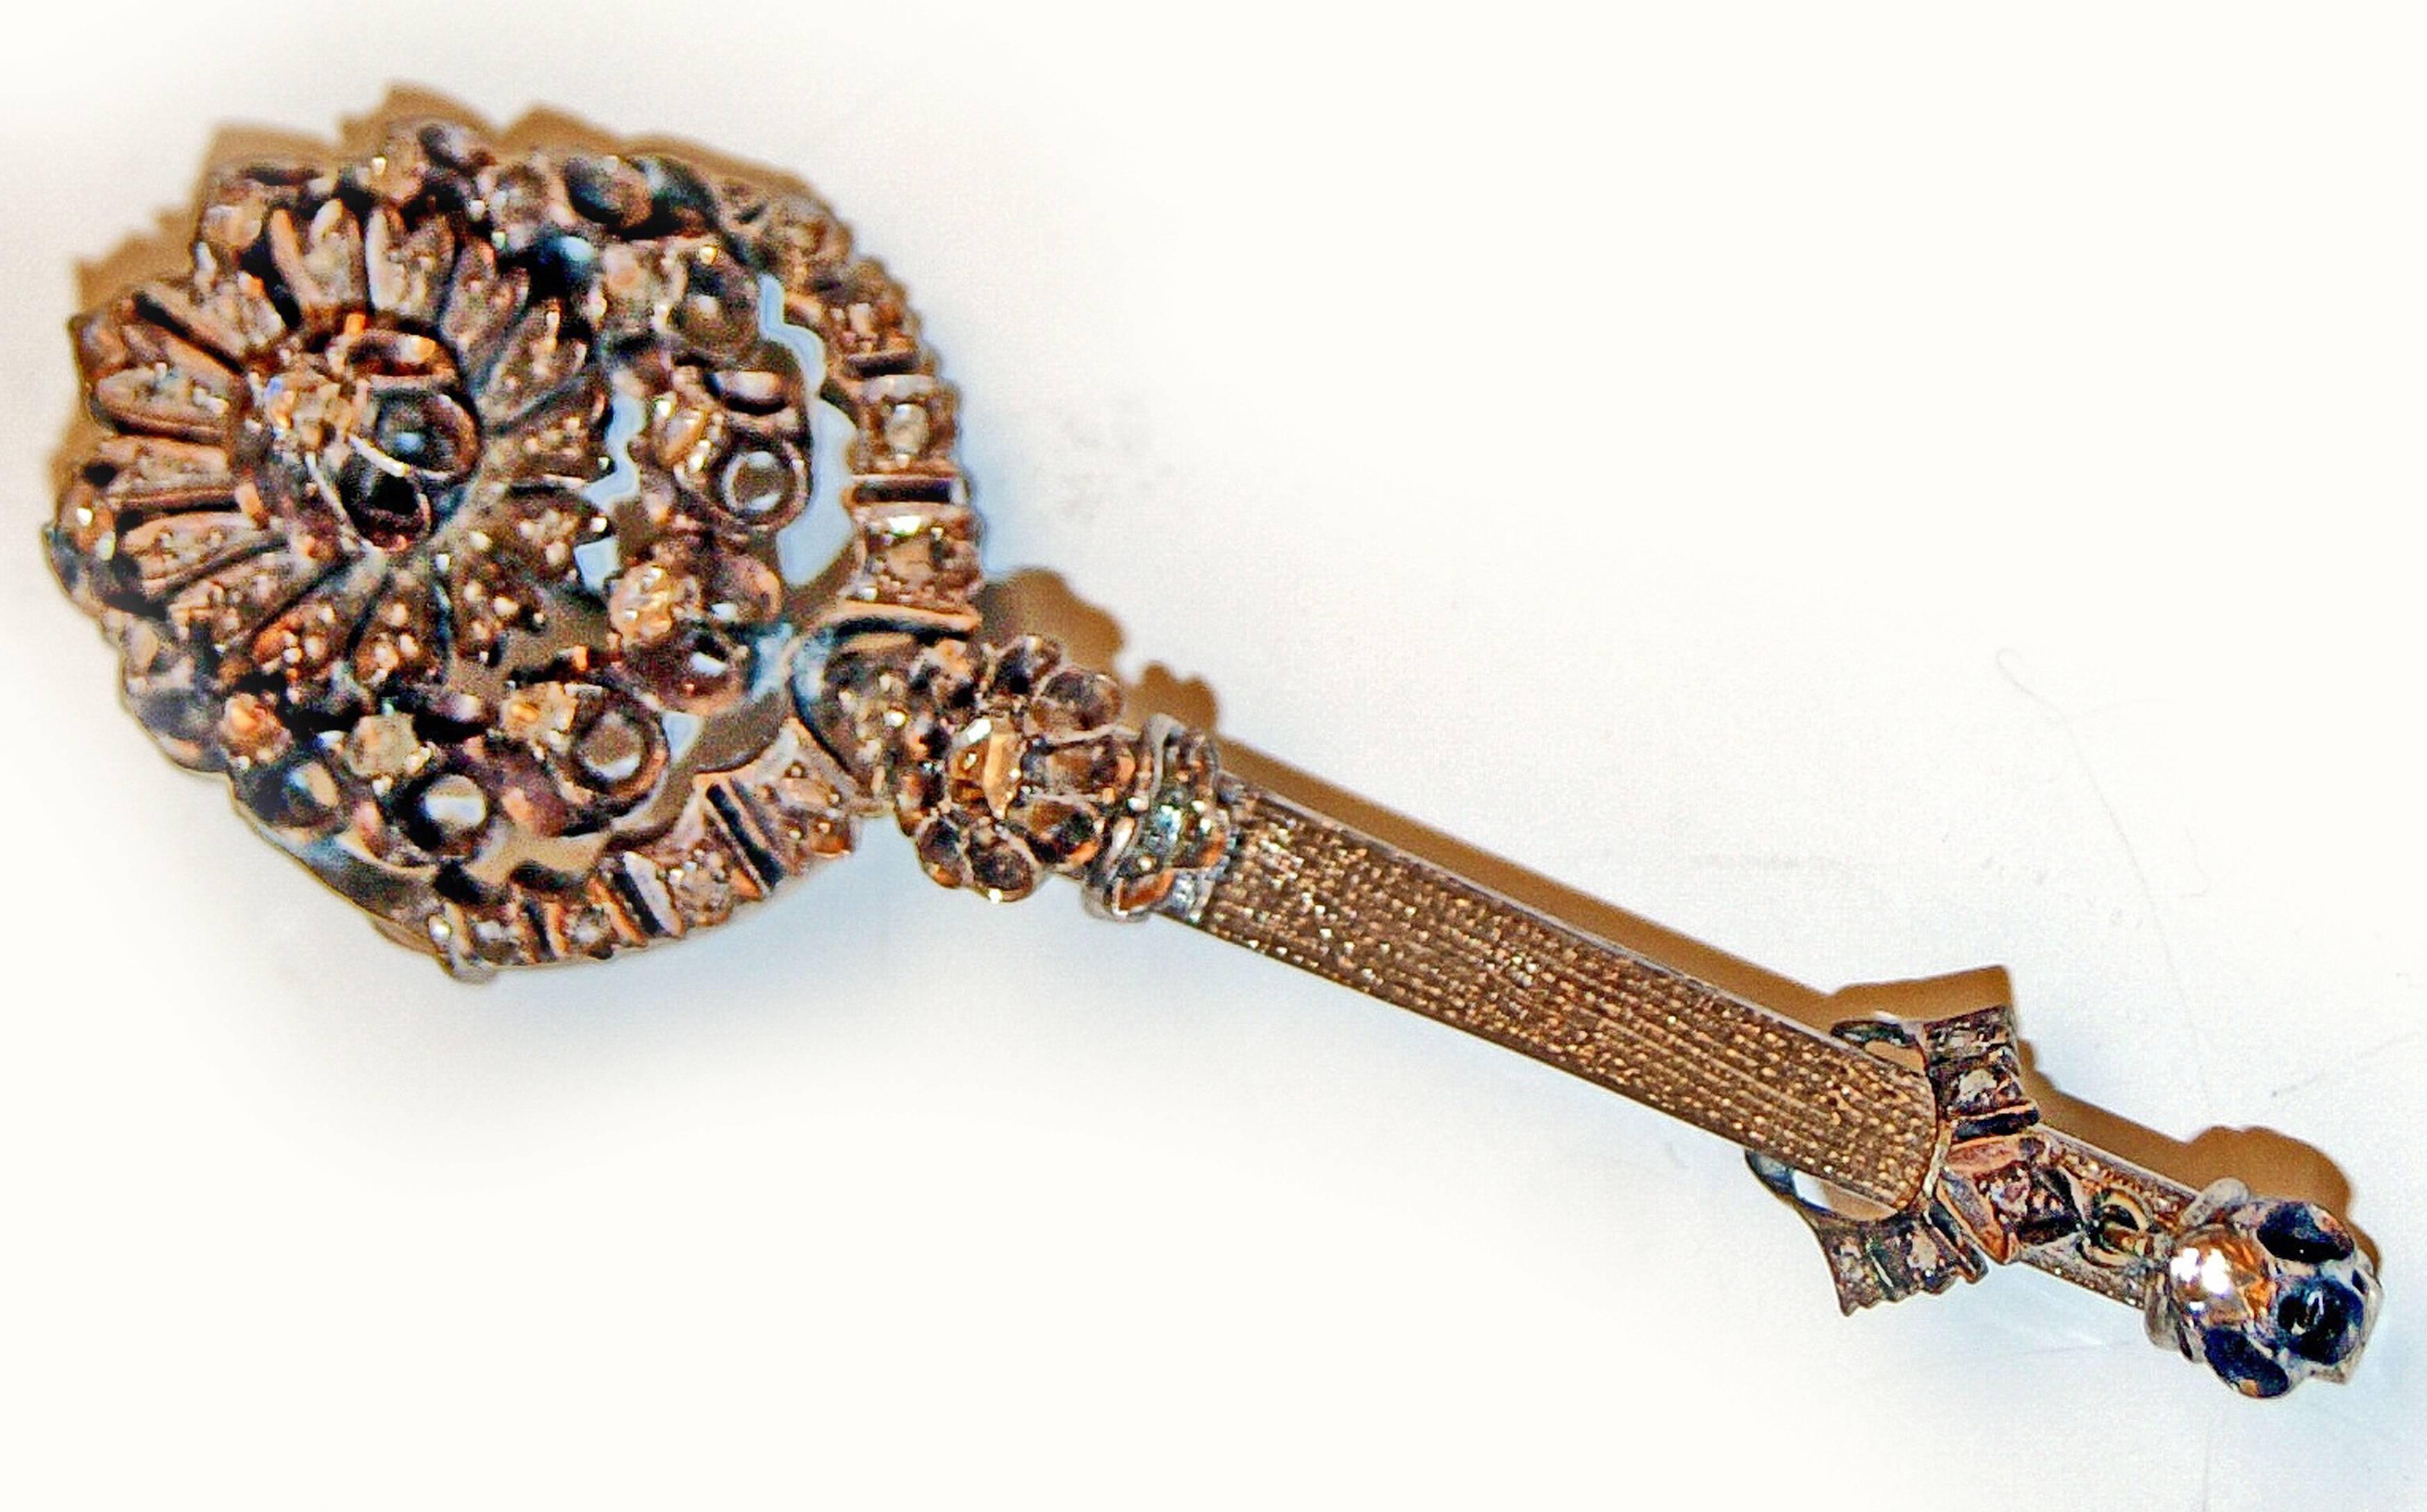 GOLDEN LATE VICTORIAN STICK BROOCH WITH DIAMONDS.
MOST PROBABLY MADE IN VIENNA  /  AUSTRIA  (c. 1900).

GOLD (14 ct / 585)  &  DIAMONDS (VINTAGE CUT / 15 larger pieces and various smaller ones /  circa 0.50 ct)  
WEIGHT:  27.0 GRAMS  (= 0.95 OZ /